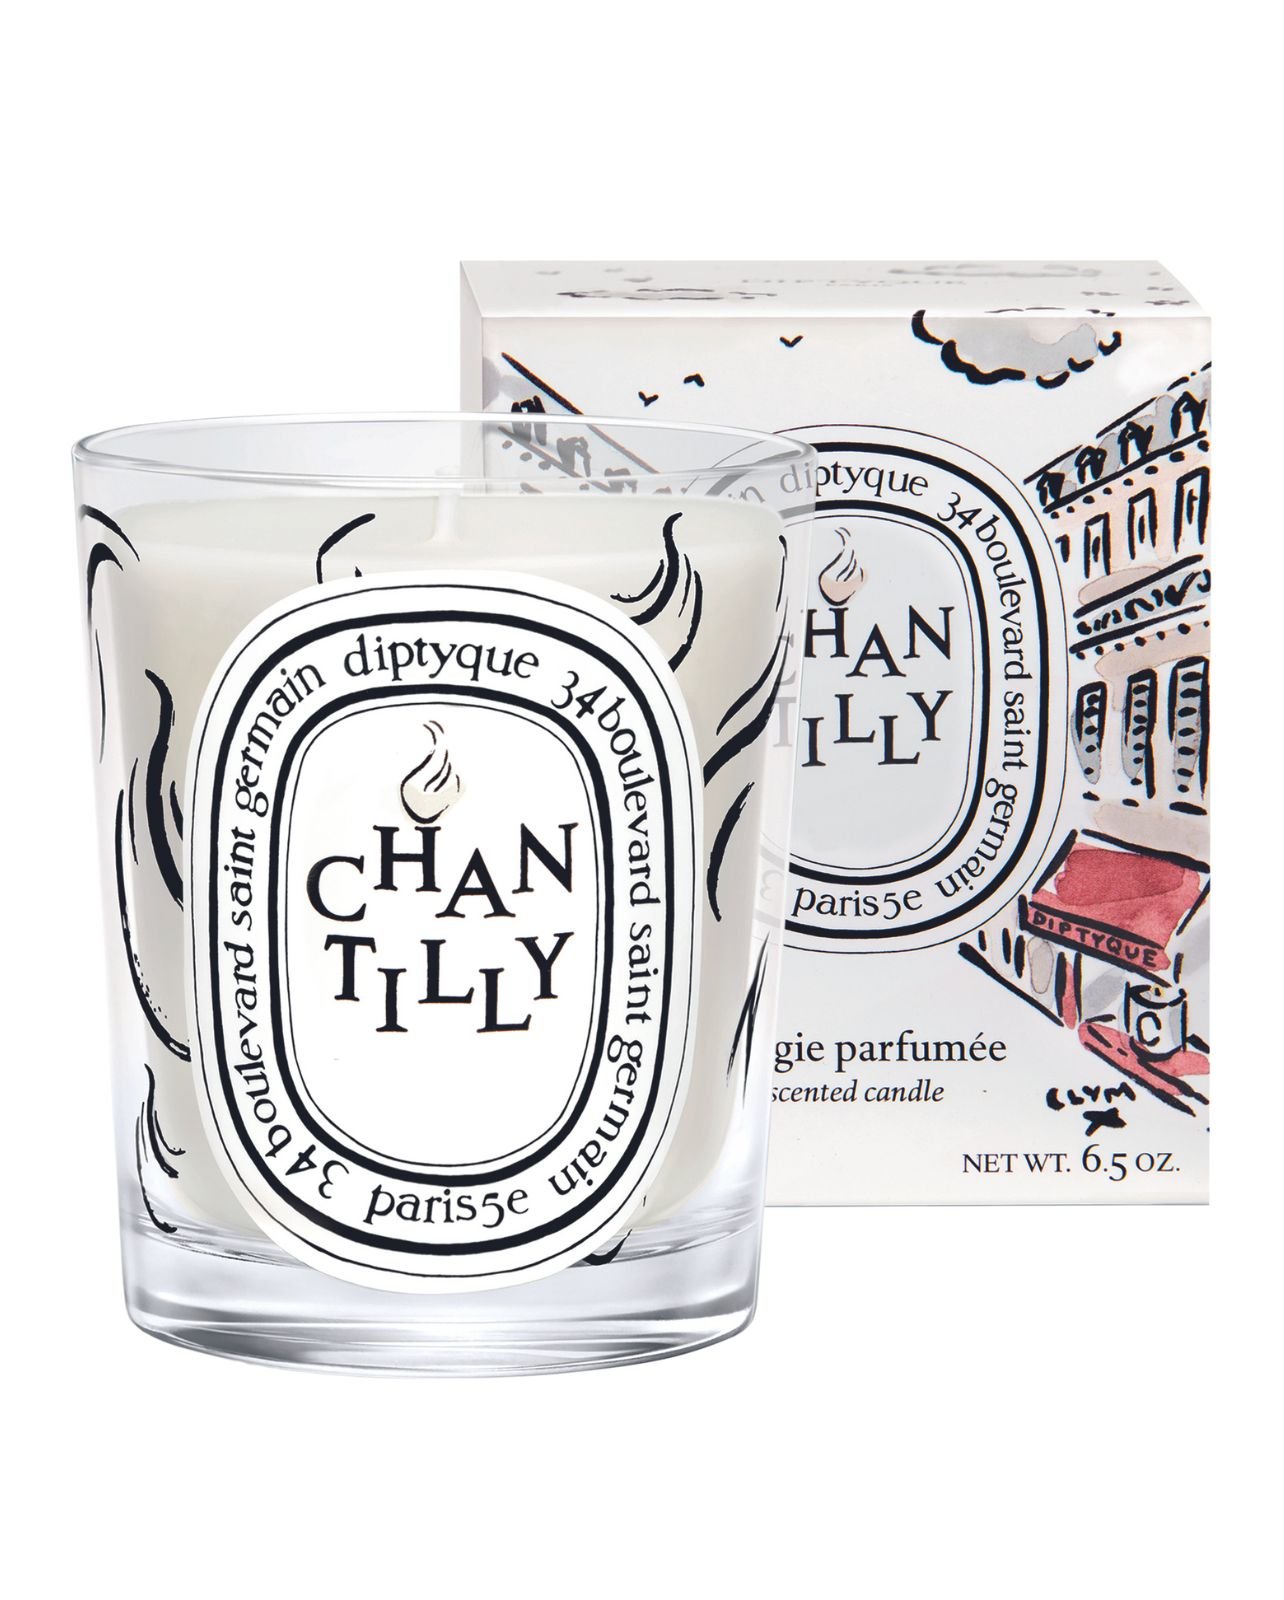 Chantilly scented candle